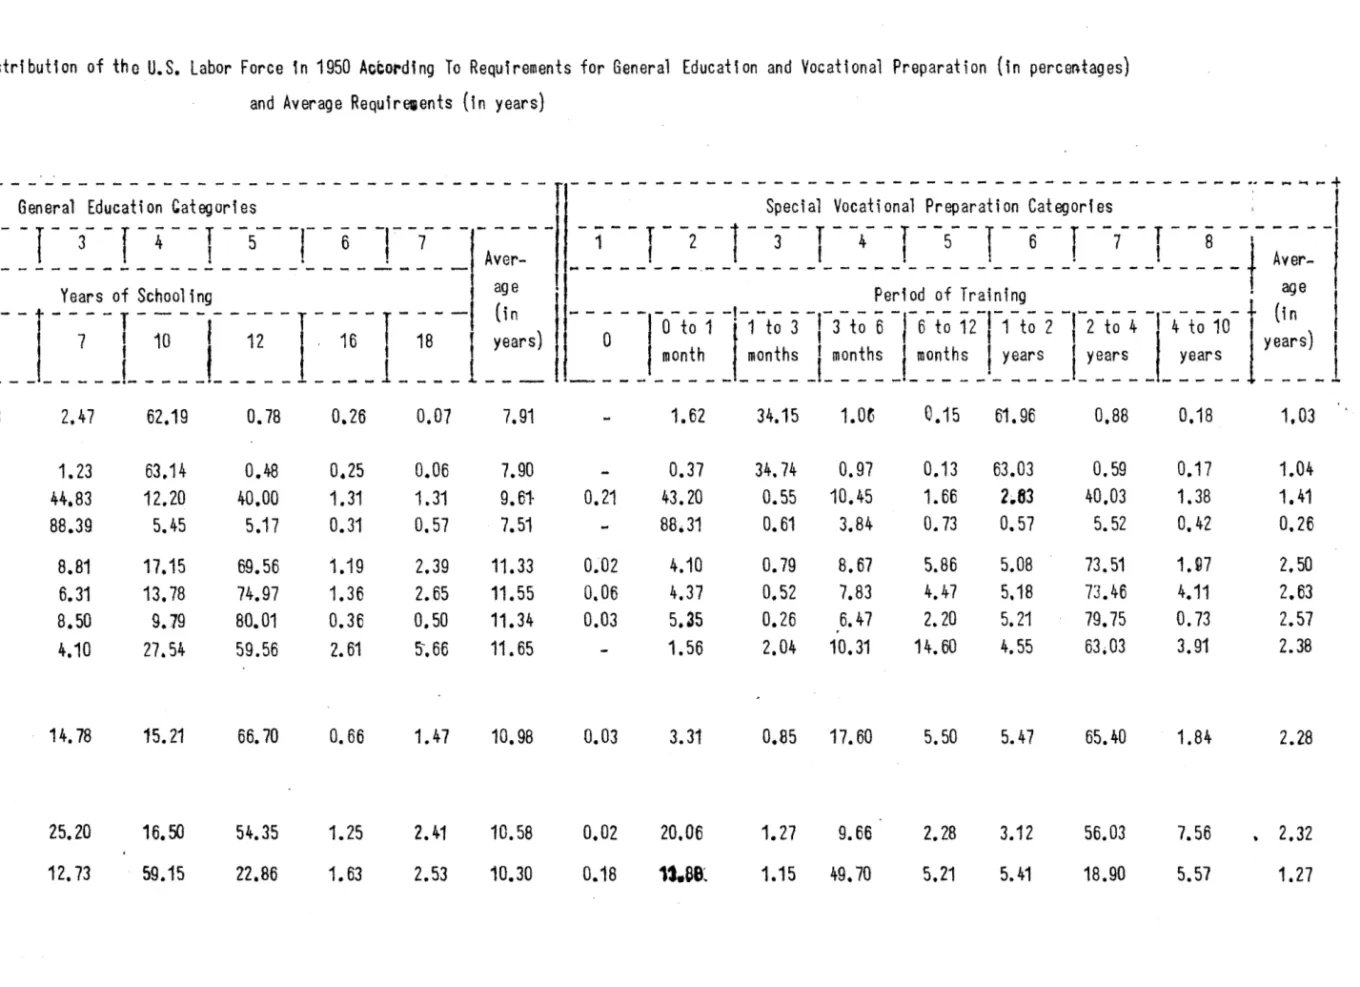 Table  IV - Distribution  of  the  U.S.  Labor  Force  in  1950  Acording  To  Requirements  for  General  Education  and  Vocational  Preparation  (in  percentages) and  Average  Requirements  (in  years)